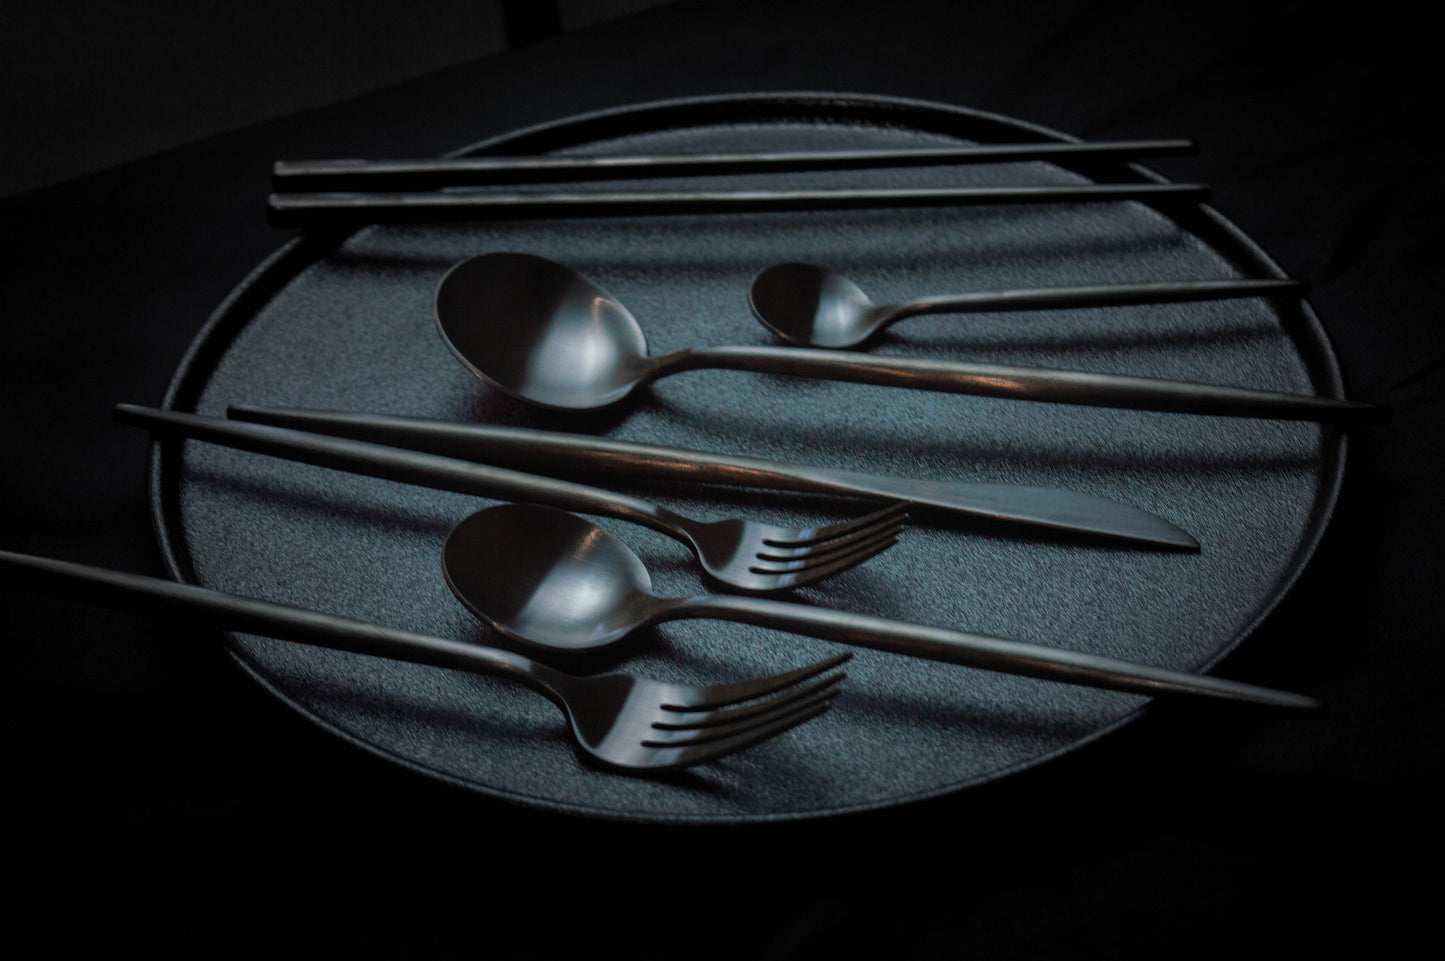 anniversary at home home party korean spoons with long handles matte gold silverware set stainless steel silverware korean spoon black kitchen utensils center pieces decoration for dining table kitchen essentials for new apartment copper utensils gold chopsticks modern dinnerware set black flatware set korean chopsticks and spoon set matte black silverware dining room table centerpiece decor